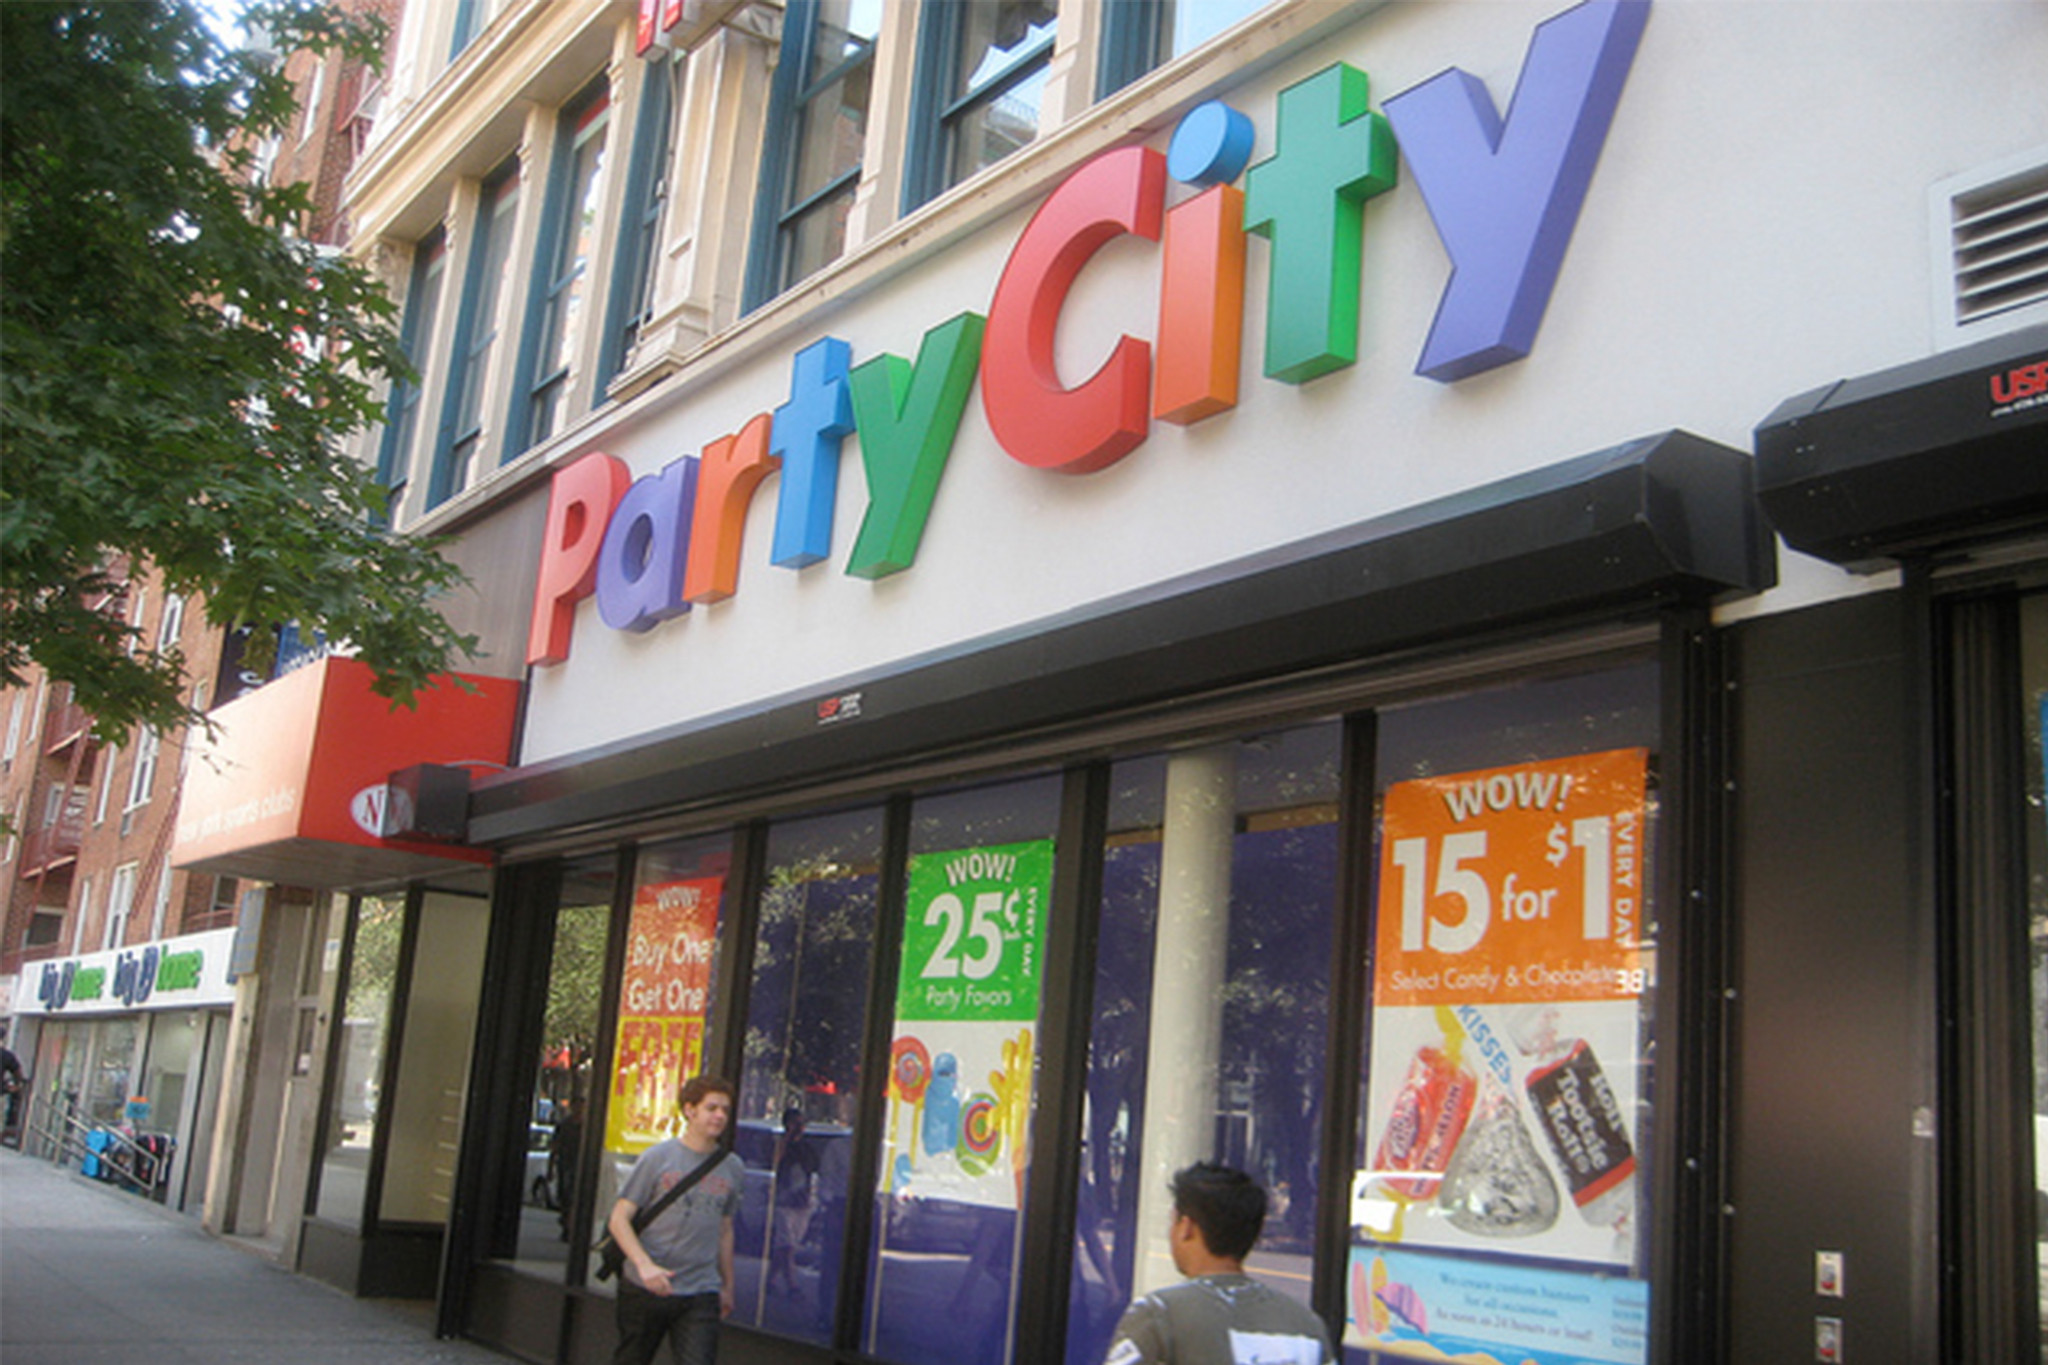 Party City Store Halloween Costumes
 Best Halloween costume stores in NYC for kids